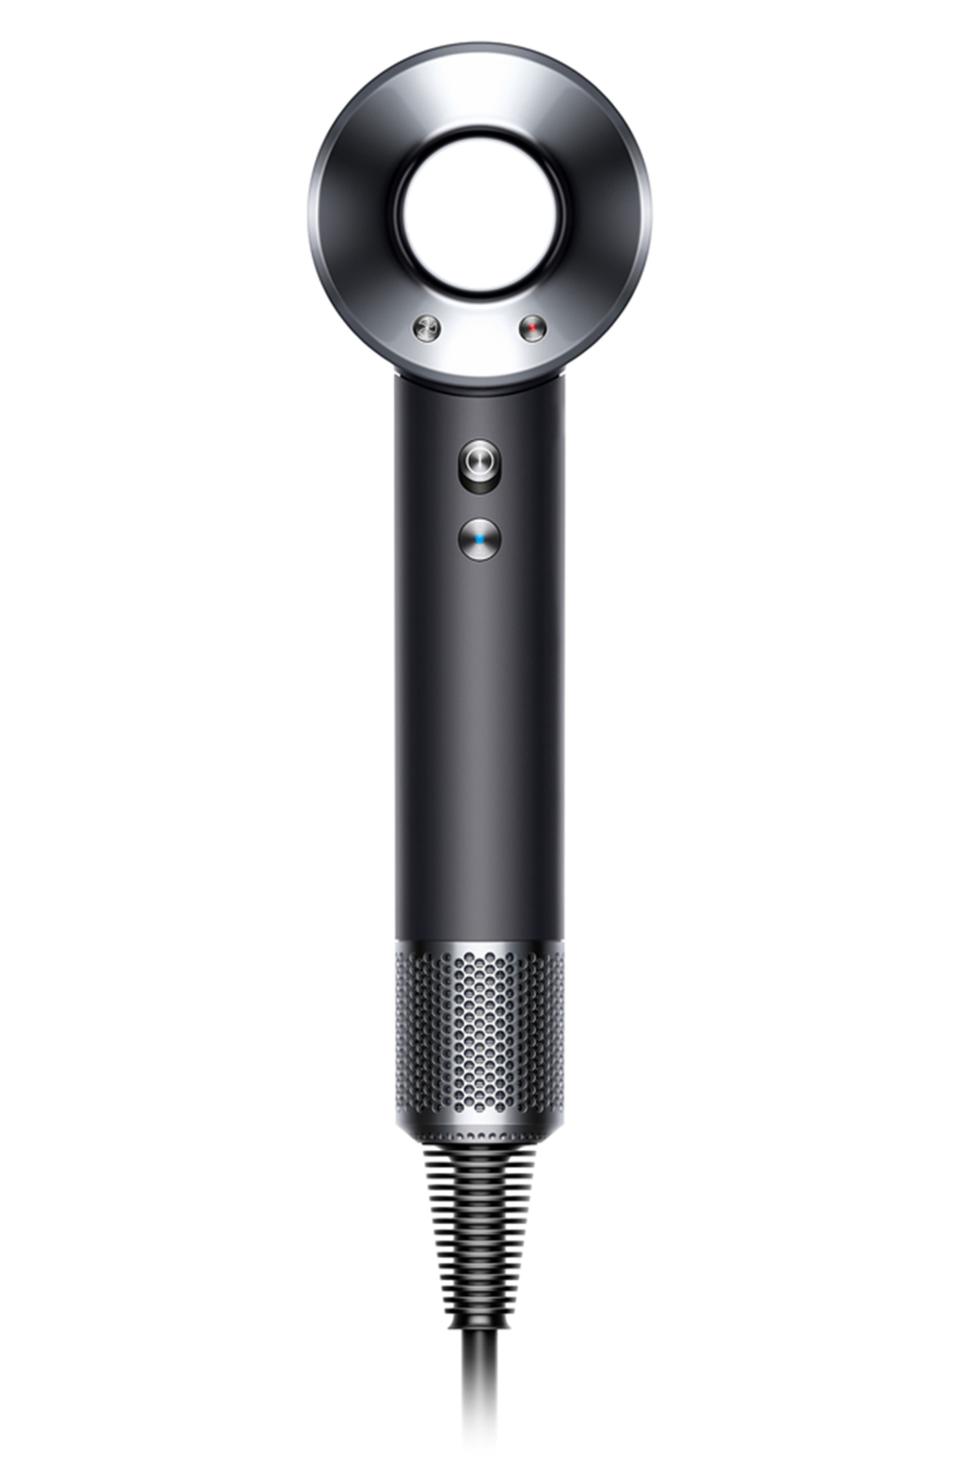 Dyson Supersonic Hair Dryer. Image via Nordstrom.